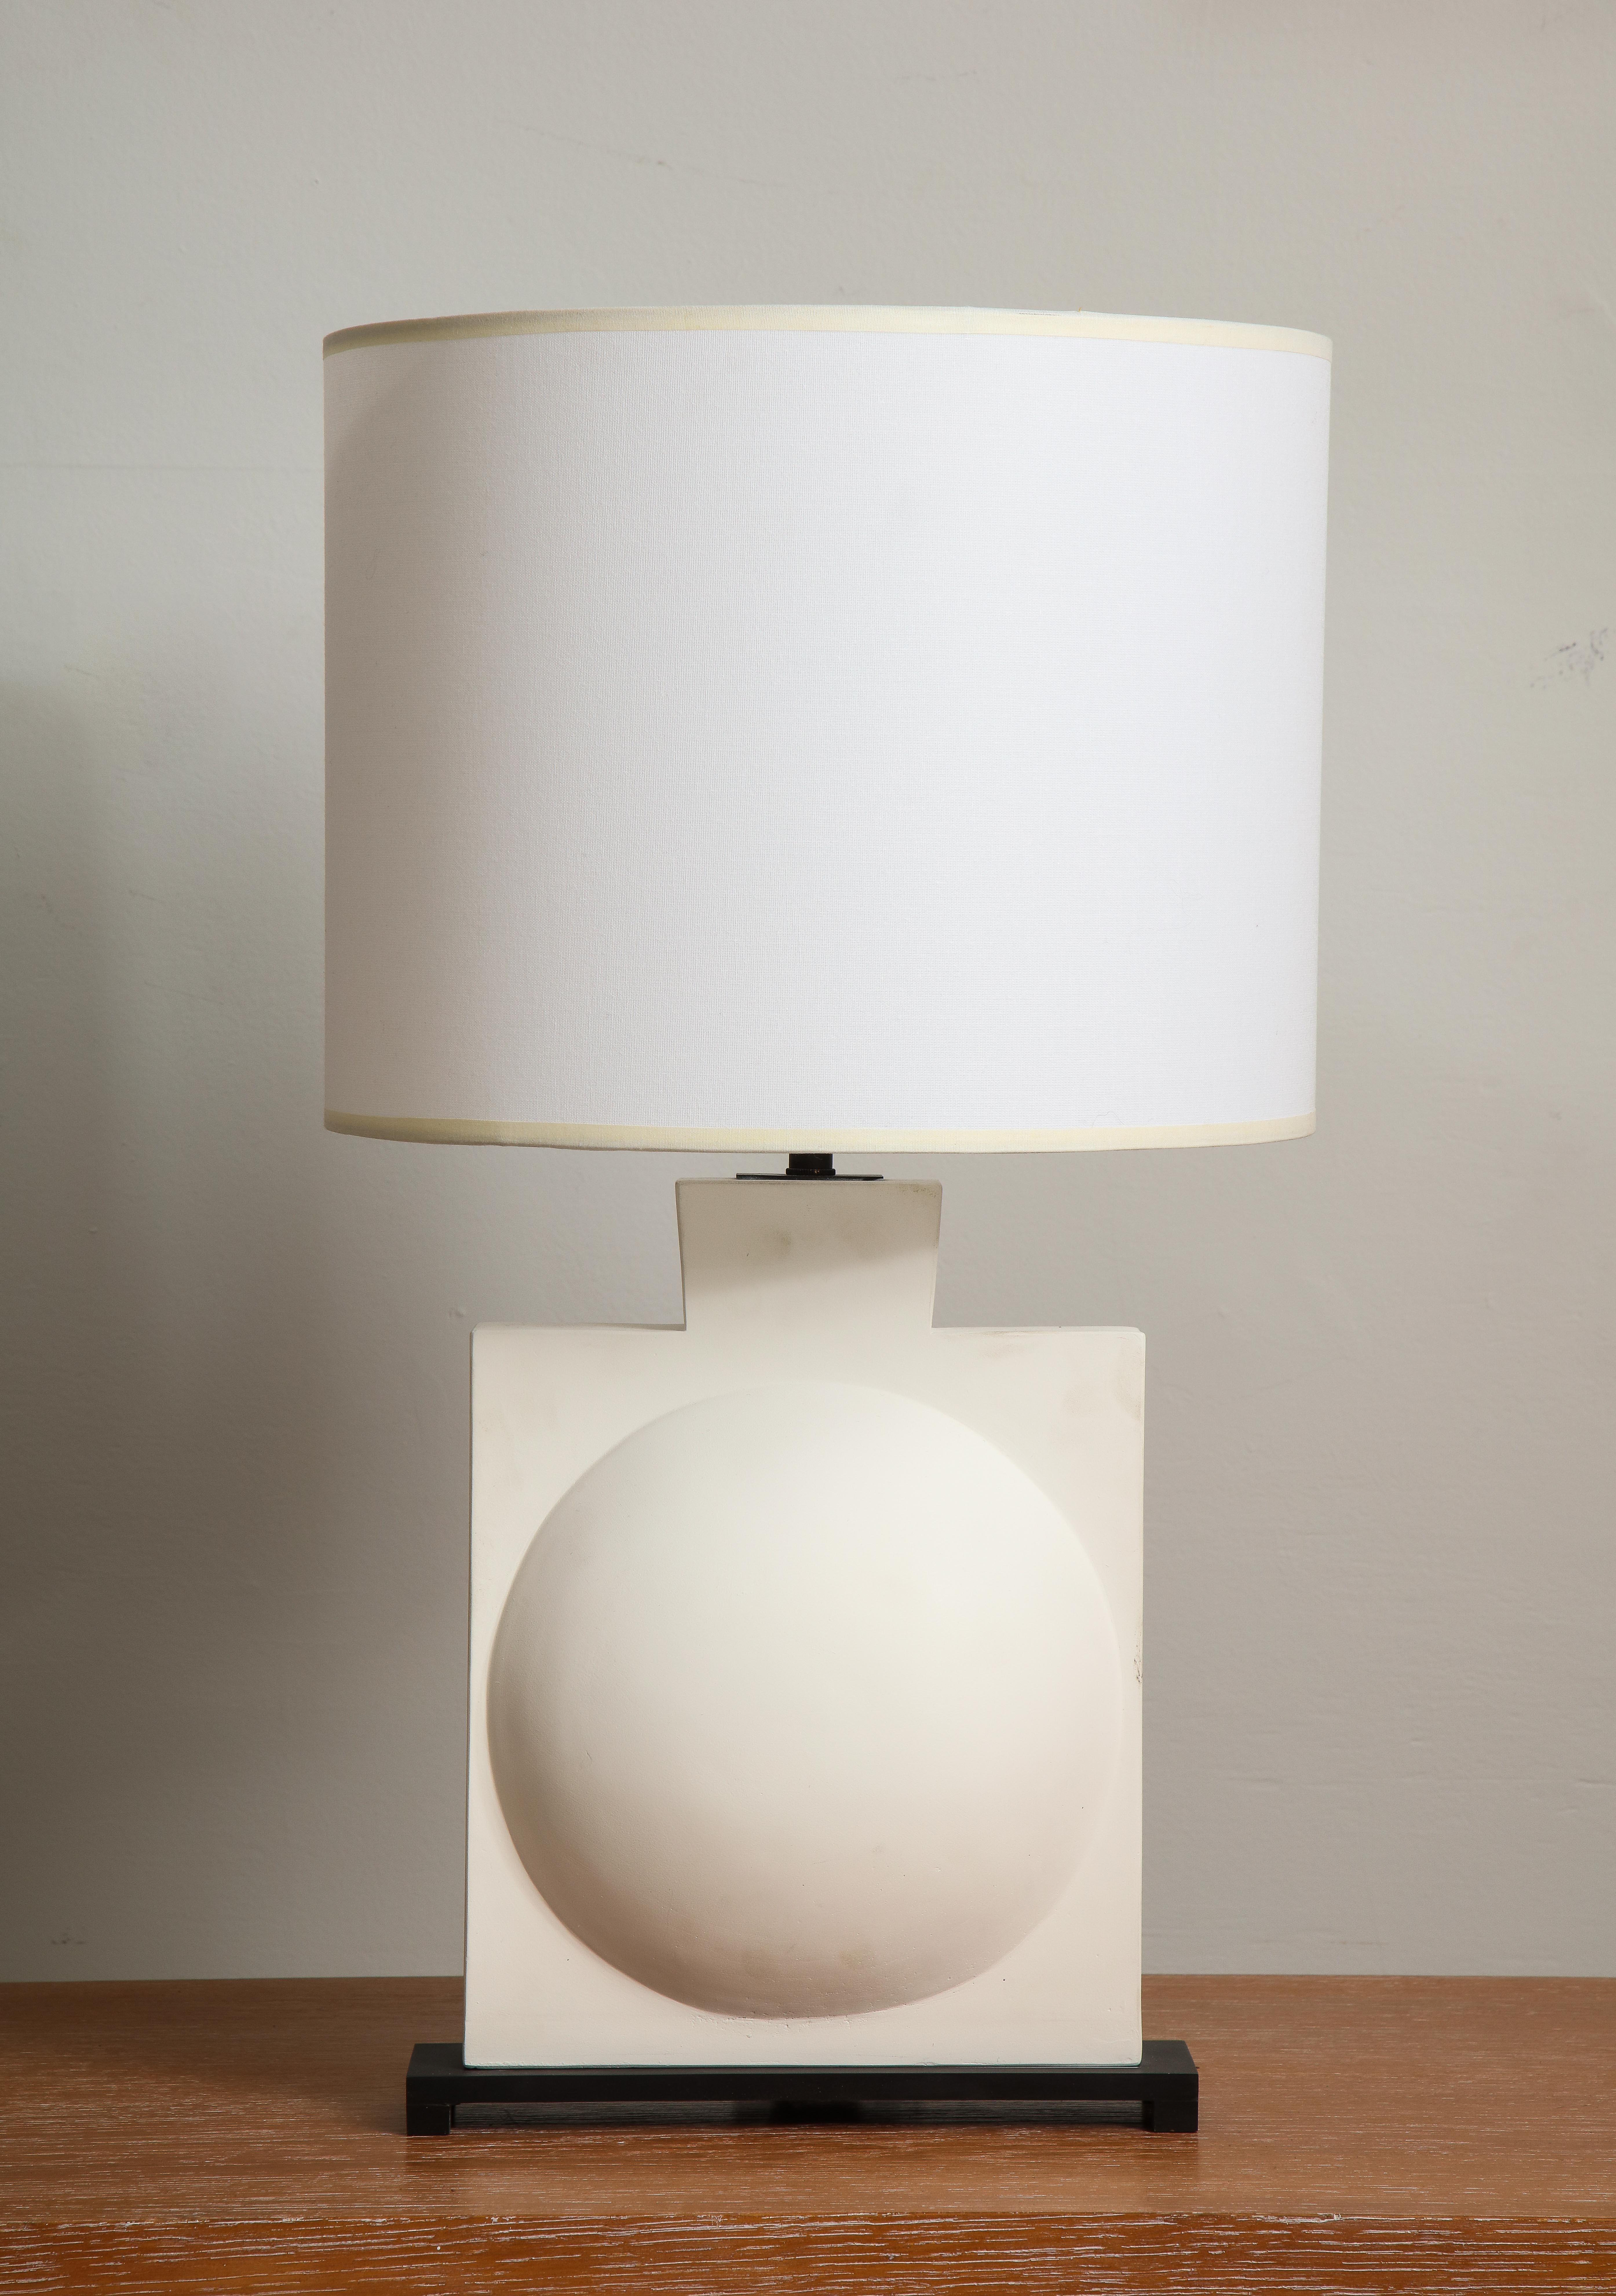 Custom pair of modern sculptural plaster lamps. 
These lamps are customizable. Please inquire.
Lead Time is 8-10 weeks.
The lamp shades are not included.